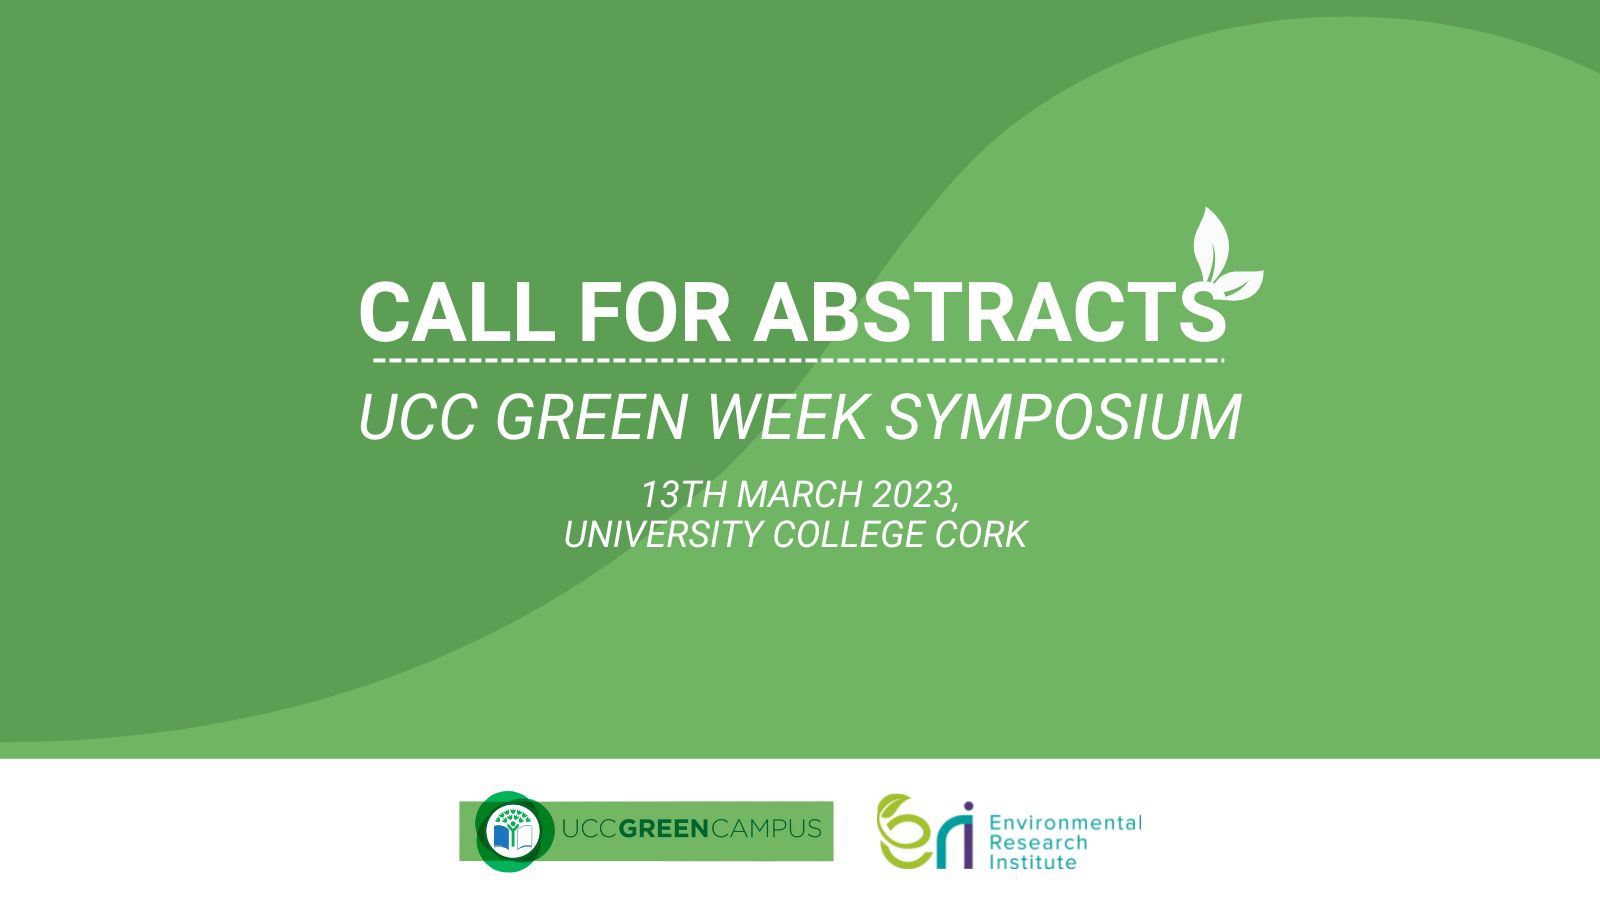  UCC Green Week Symposium: Call for Abstracts